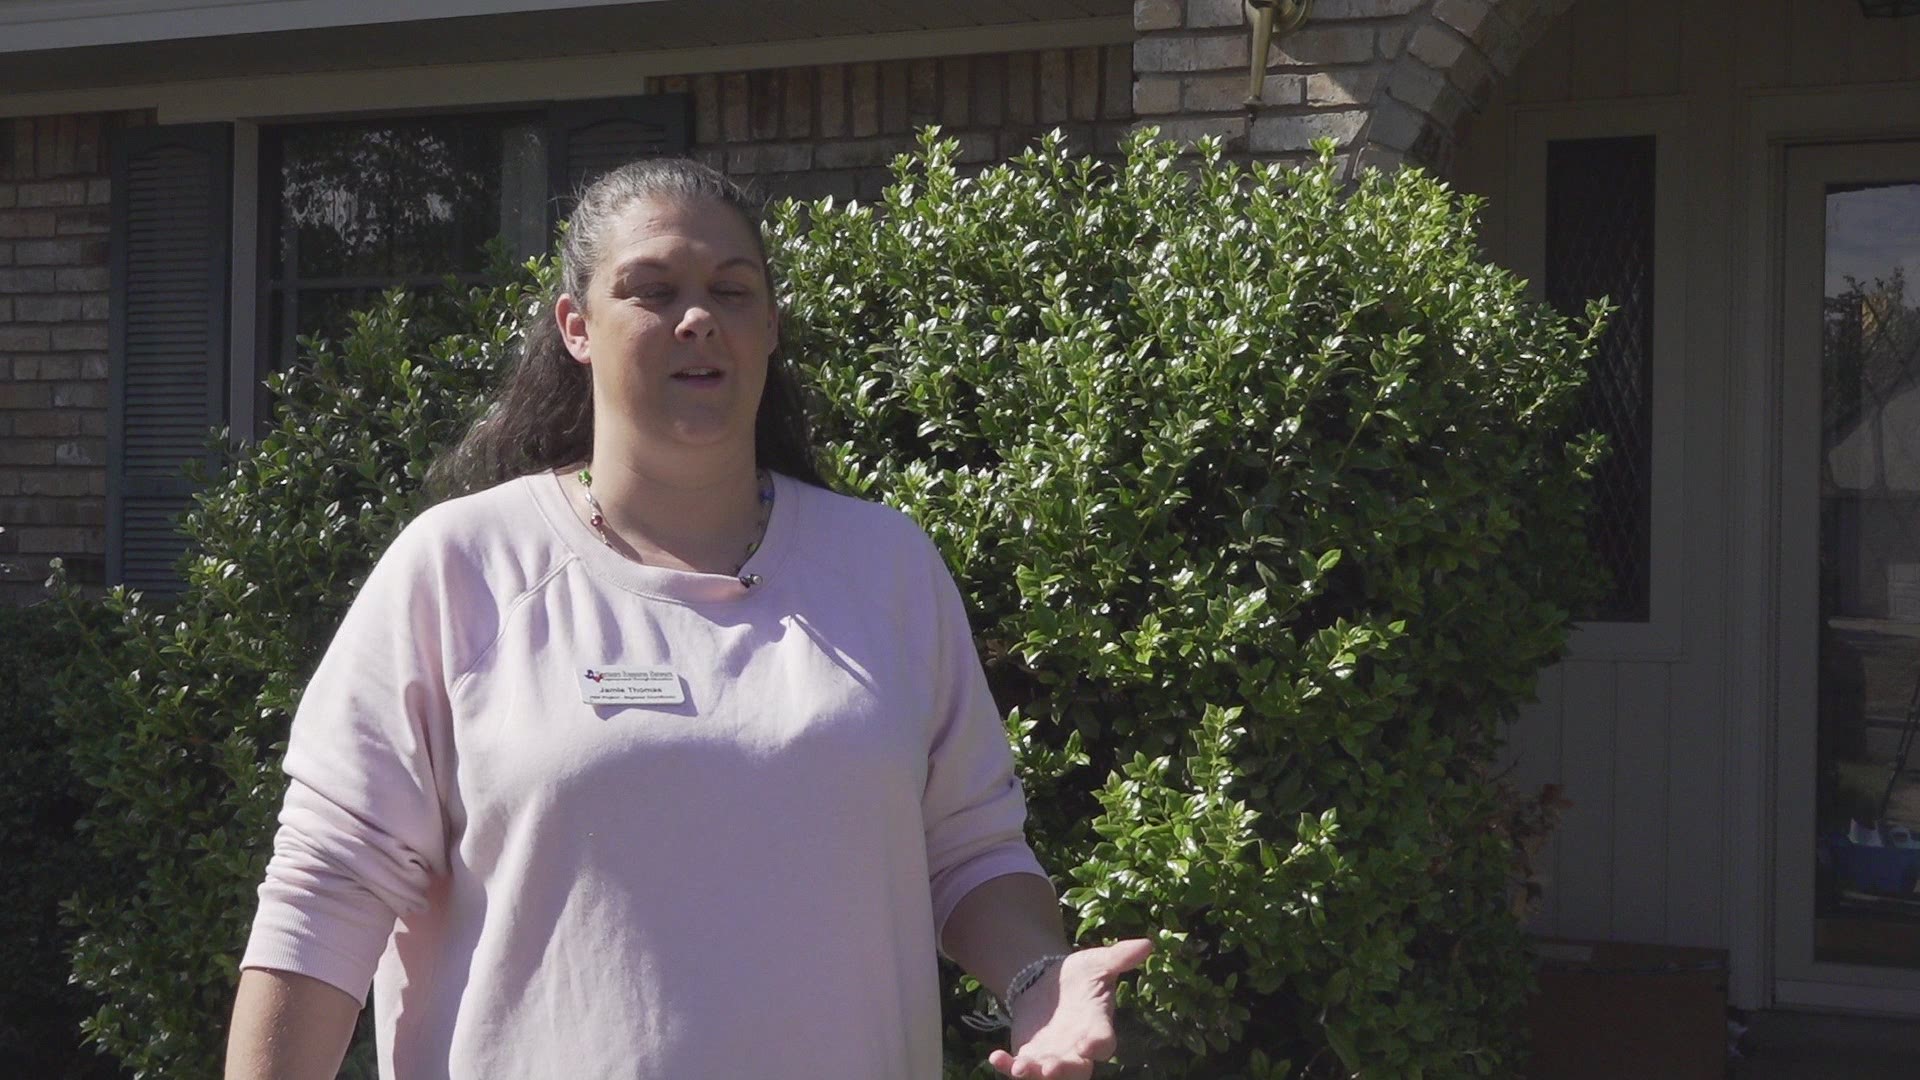 West Texas mother encourages all neighborhoods to include trick or treaters with special needs